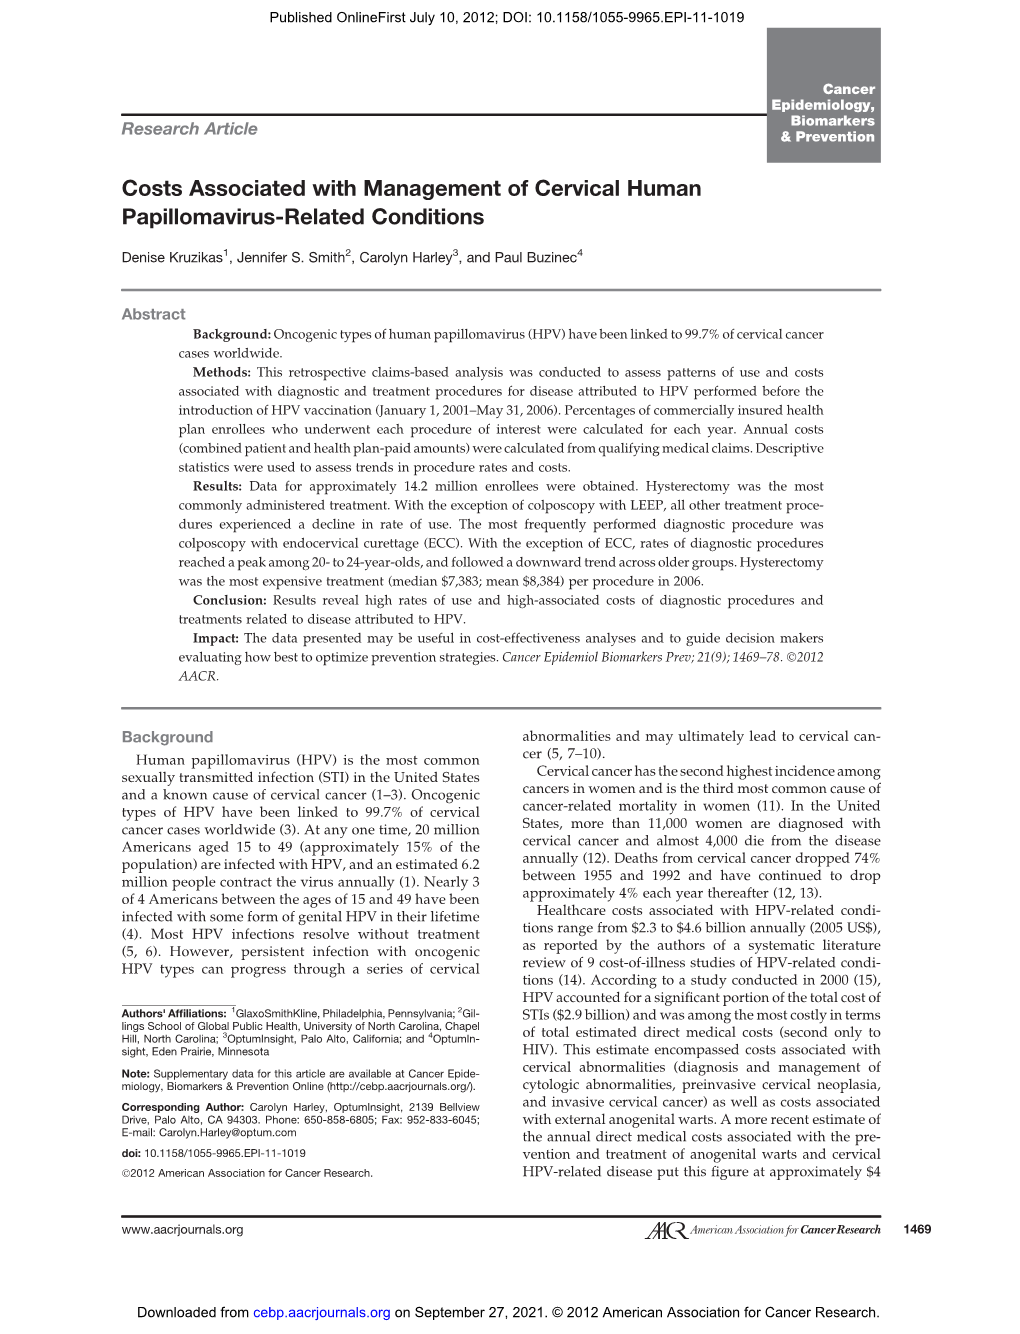 Costs Associated with Management of Cervical Human Papillomavirus-Related Conditions